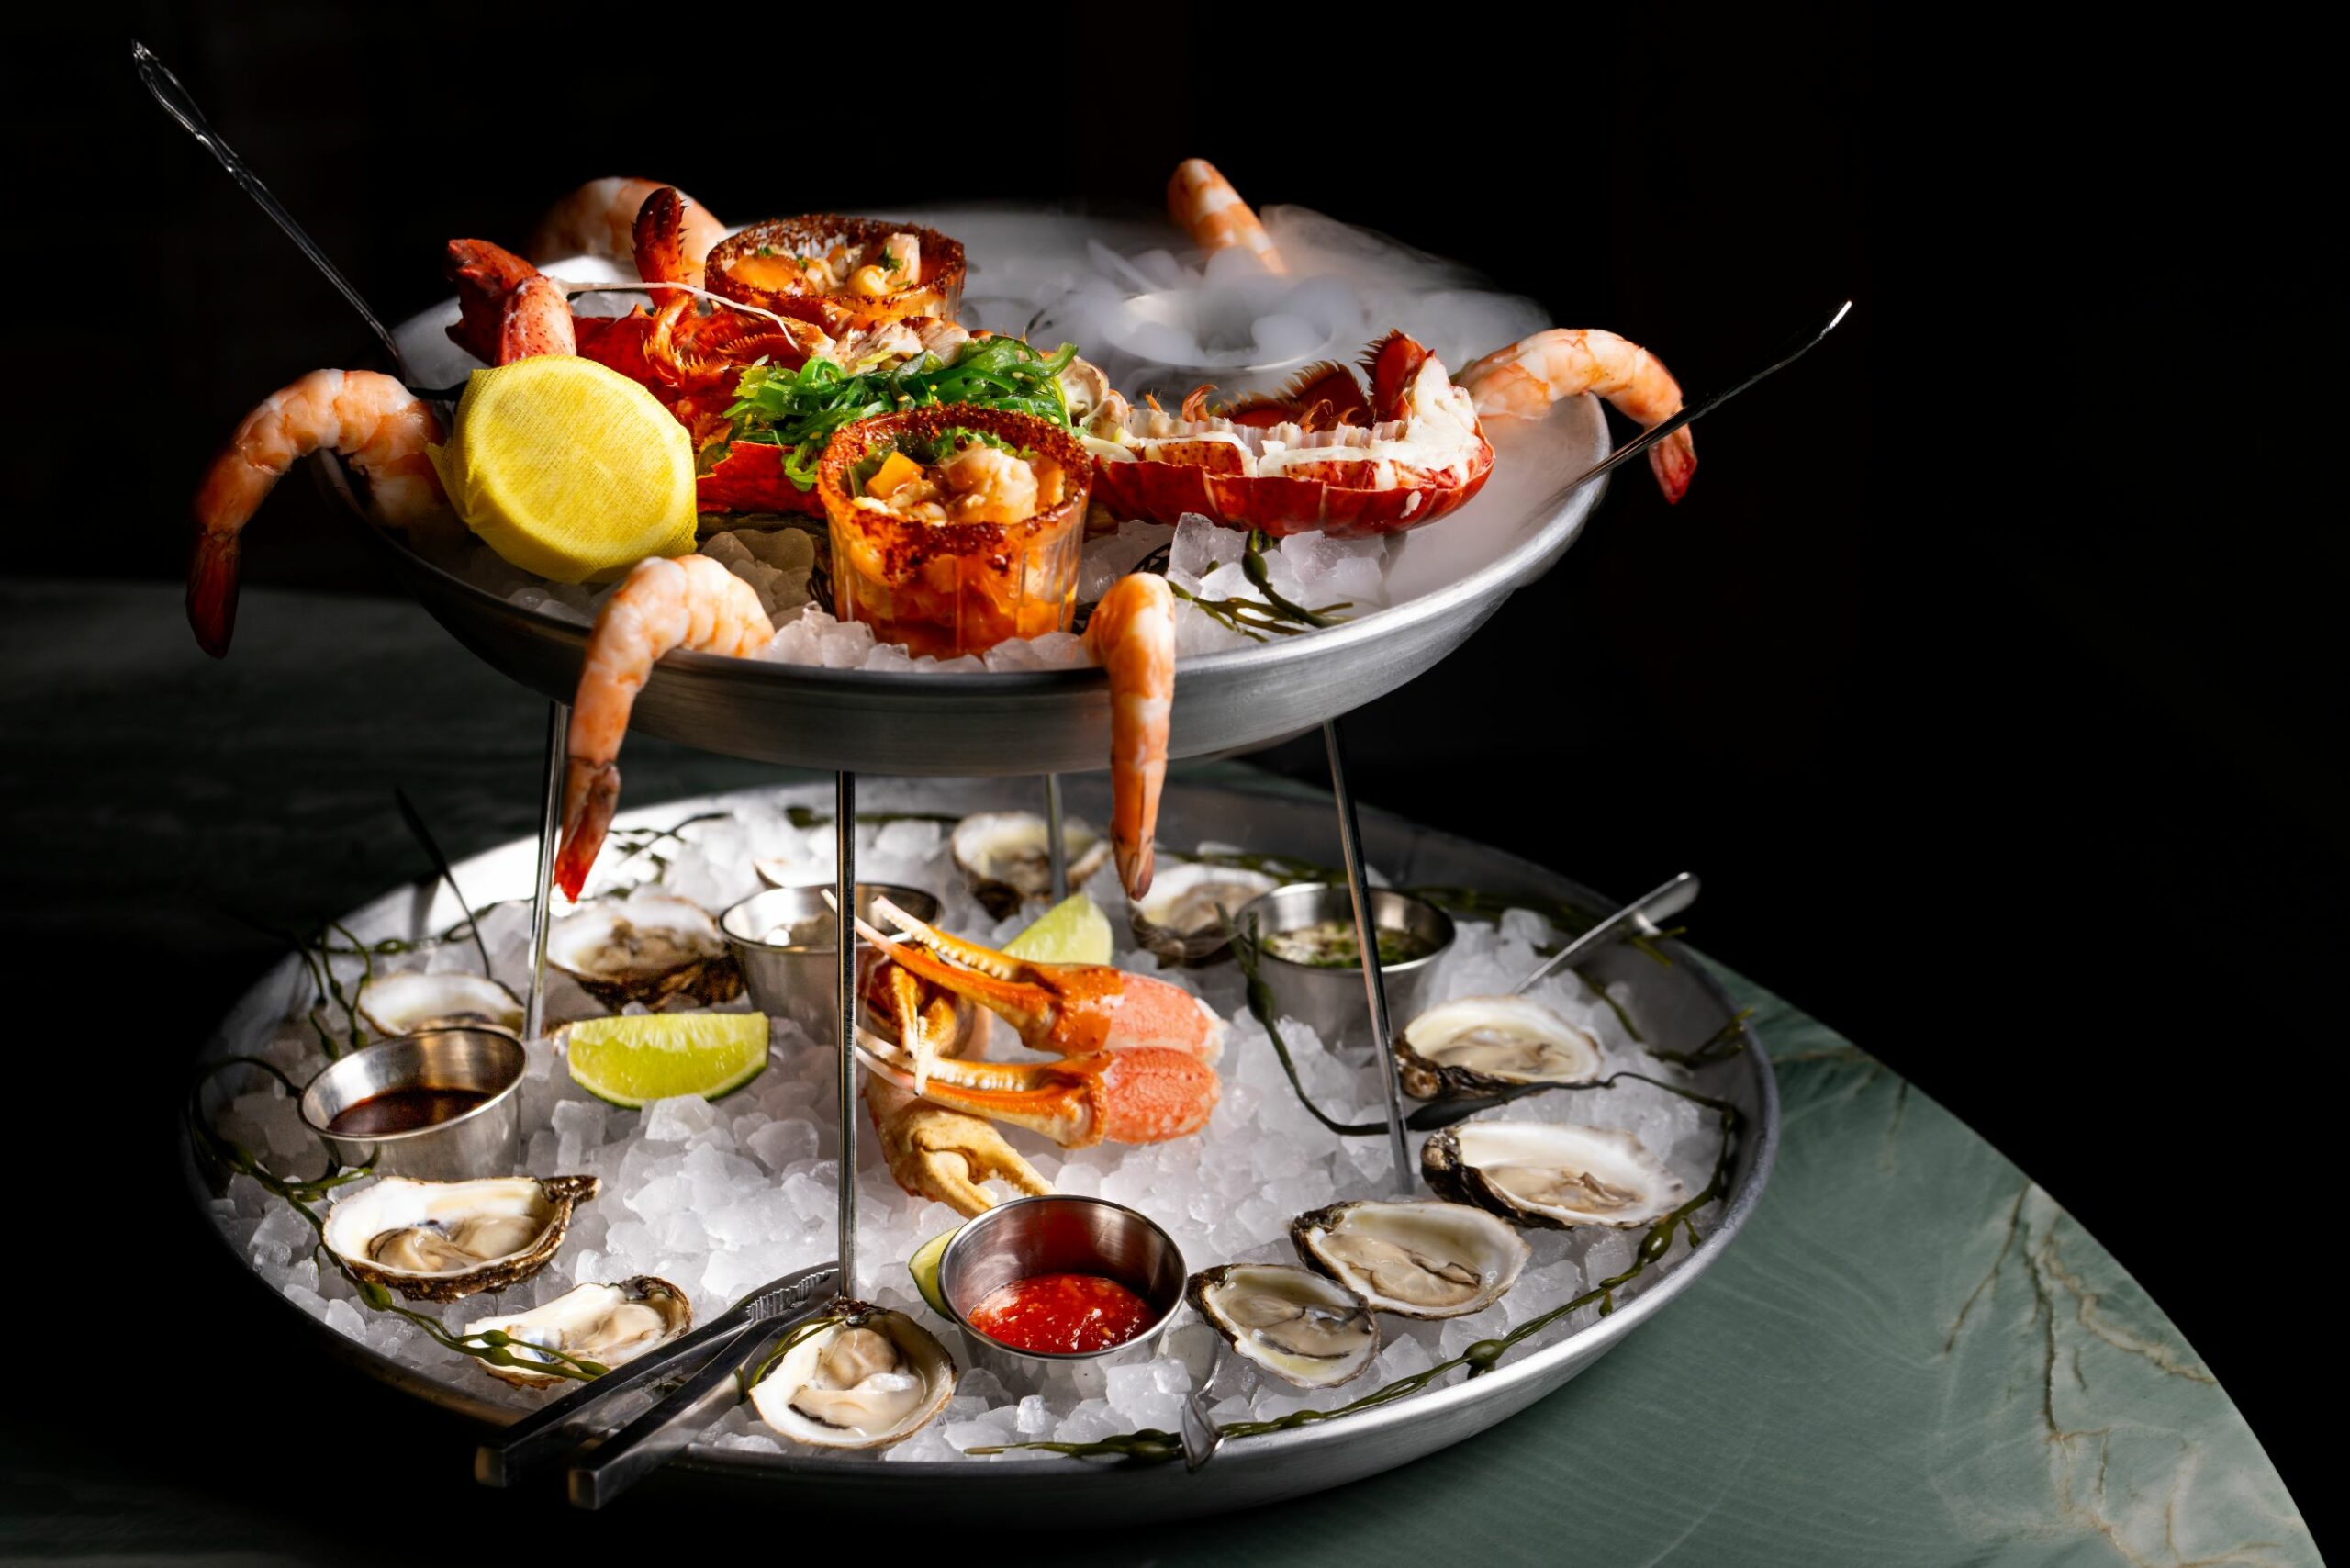 An image of the Seafood Tower from Pez Coastal Kitchen.